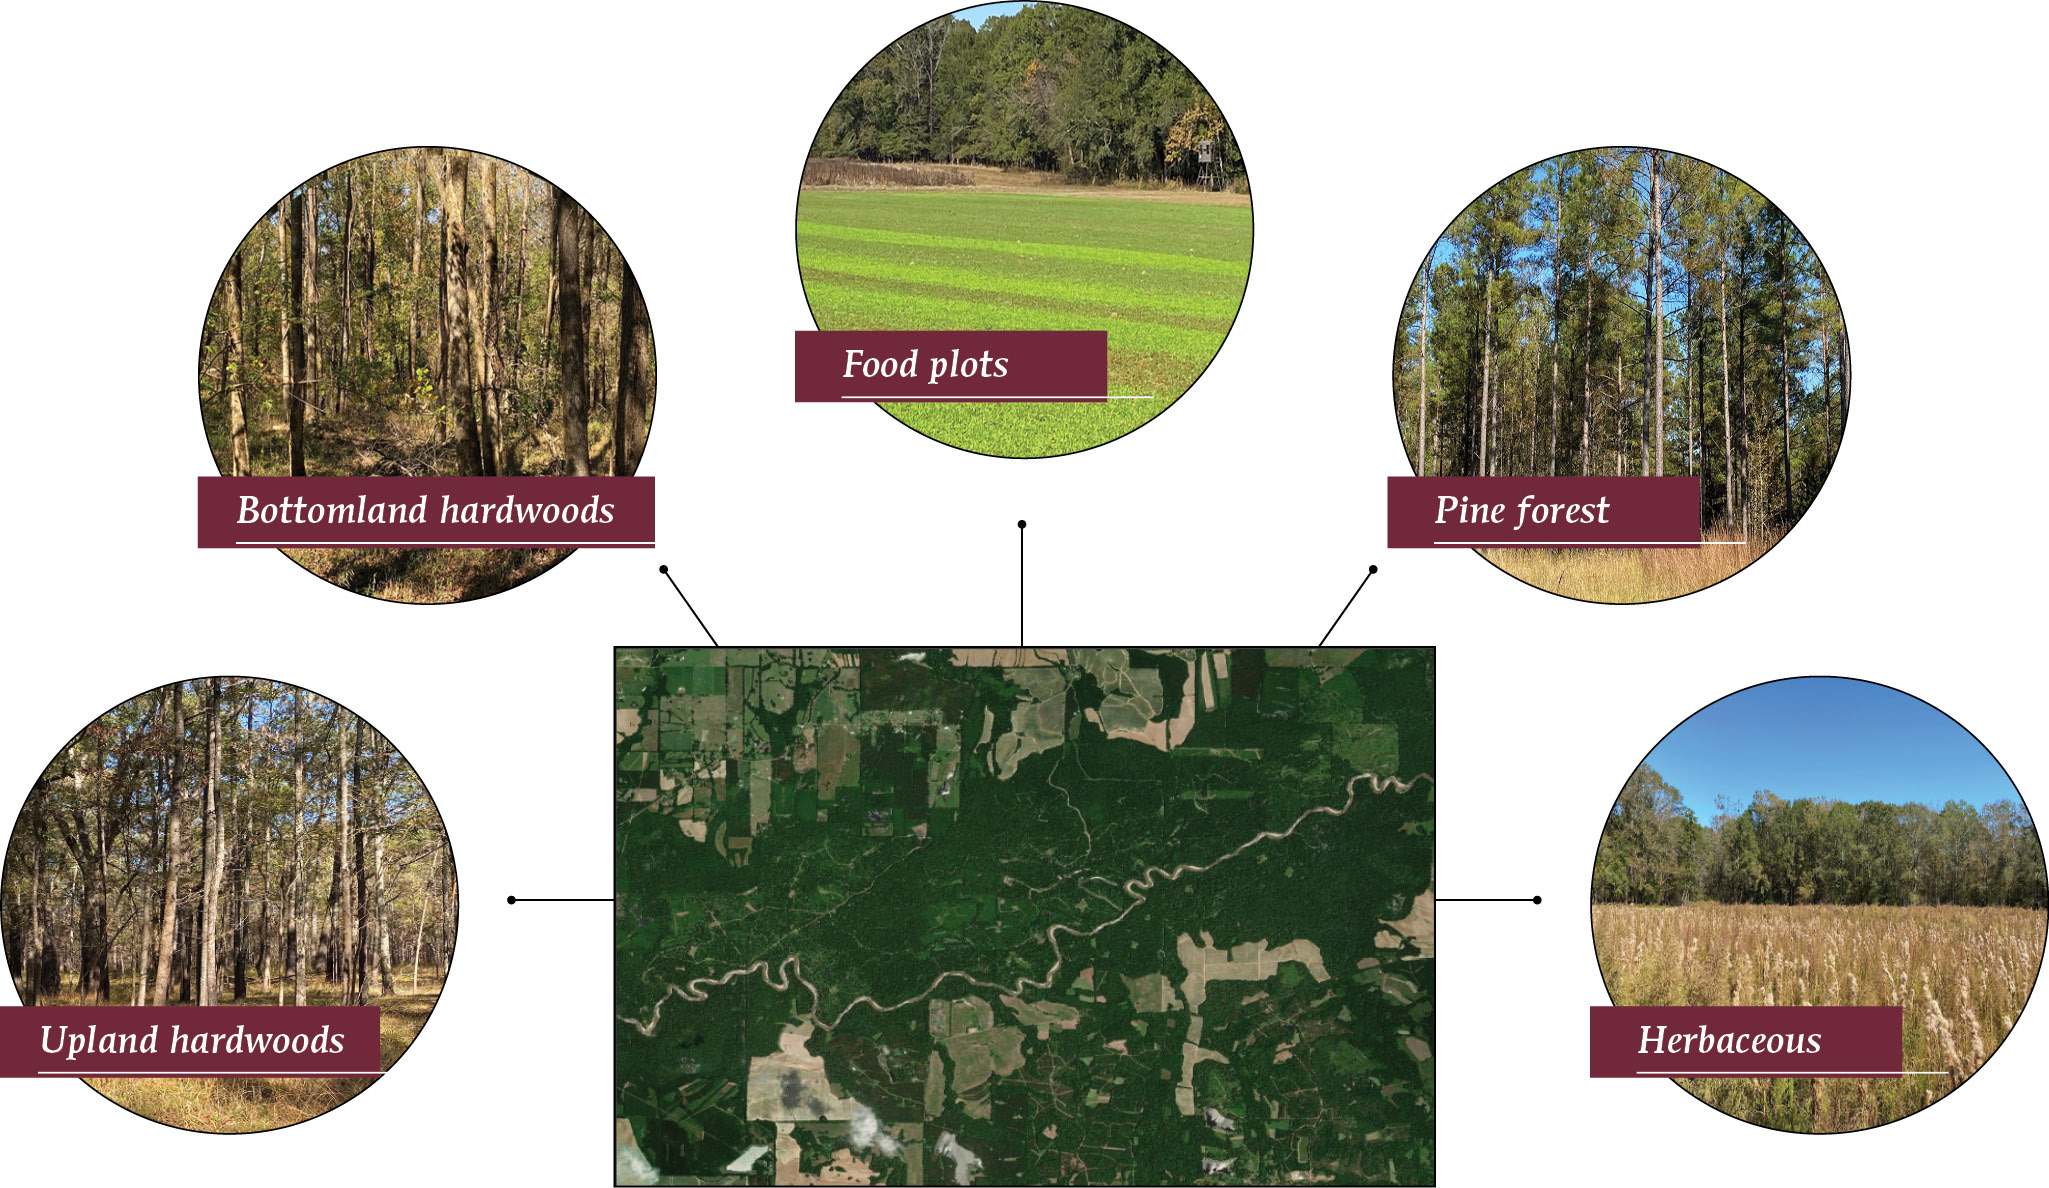 The study area included upland hardwoods, bottomland hardwoods, food plots, pine forests, and herbaceous areas. These are described in text on page 5.